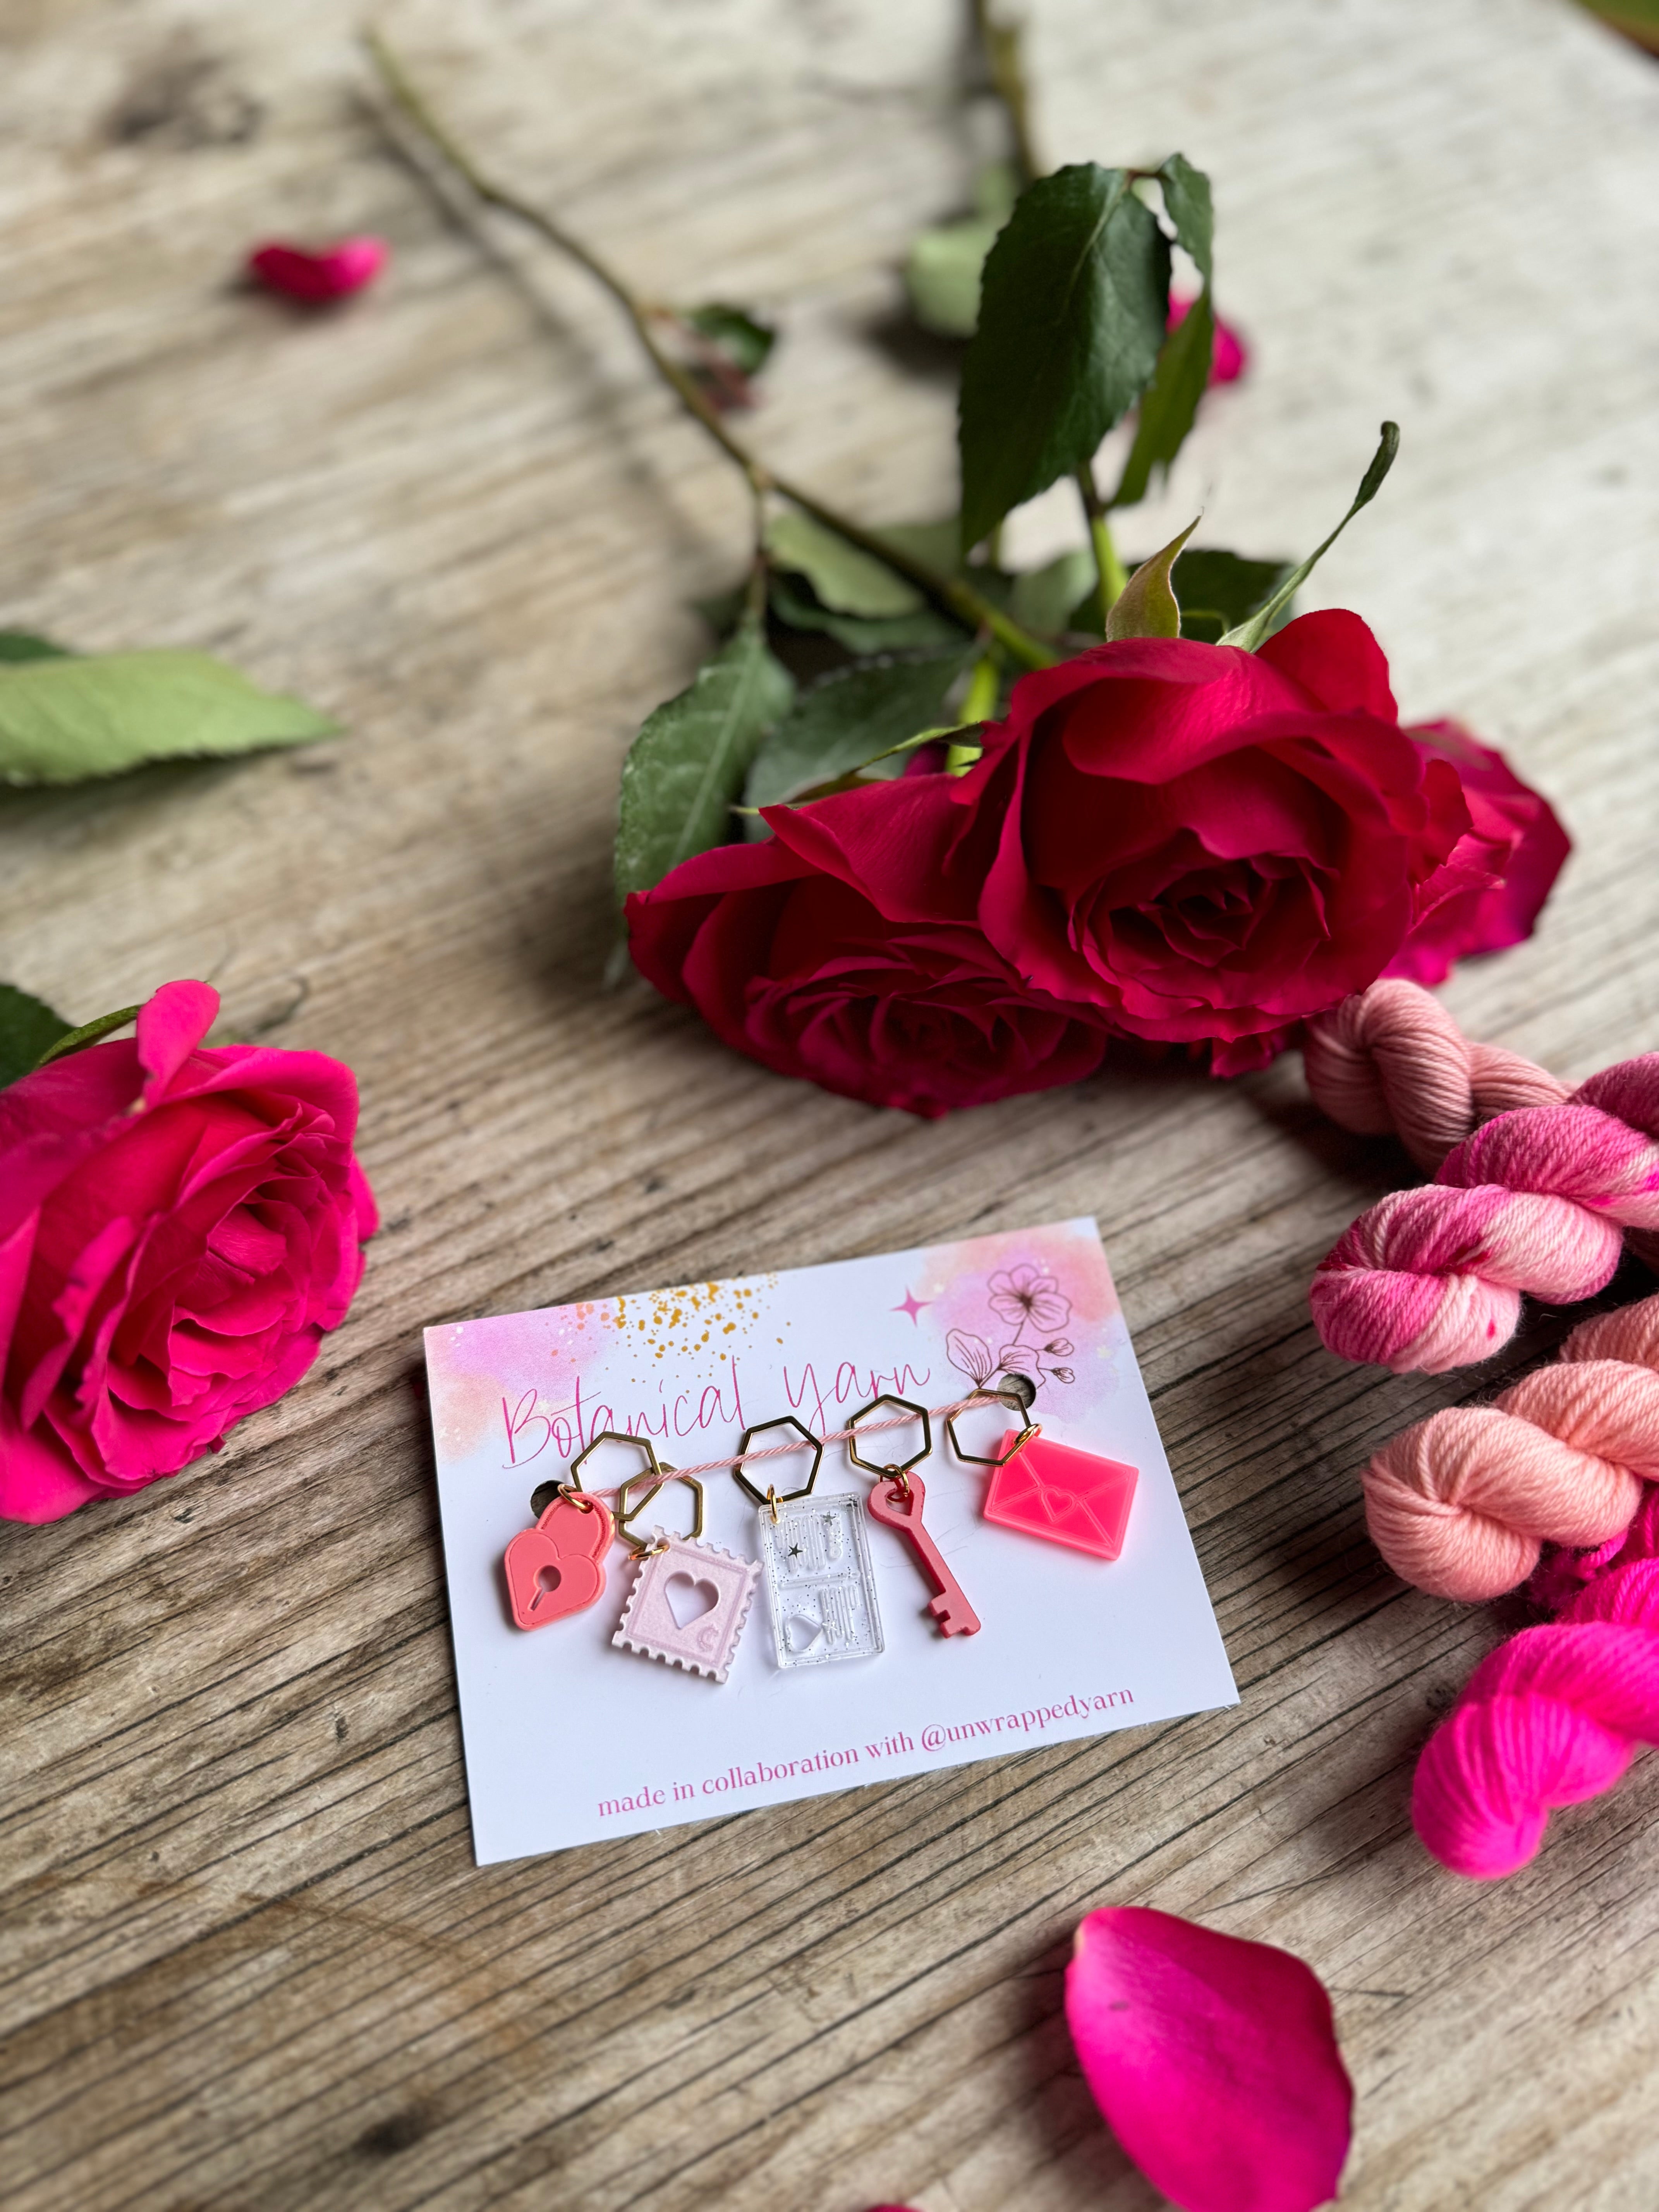 Valentine Stitch markers / progress keepers made in collaboration with Unwrapped Yarn